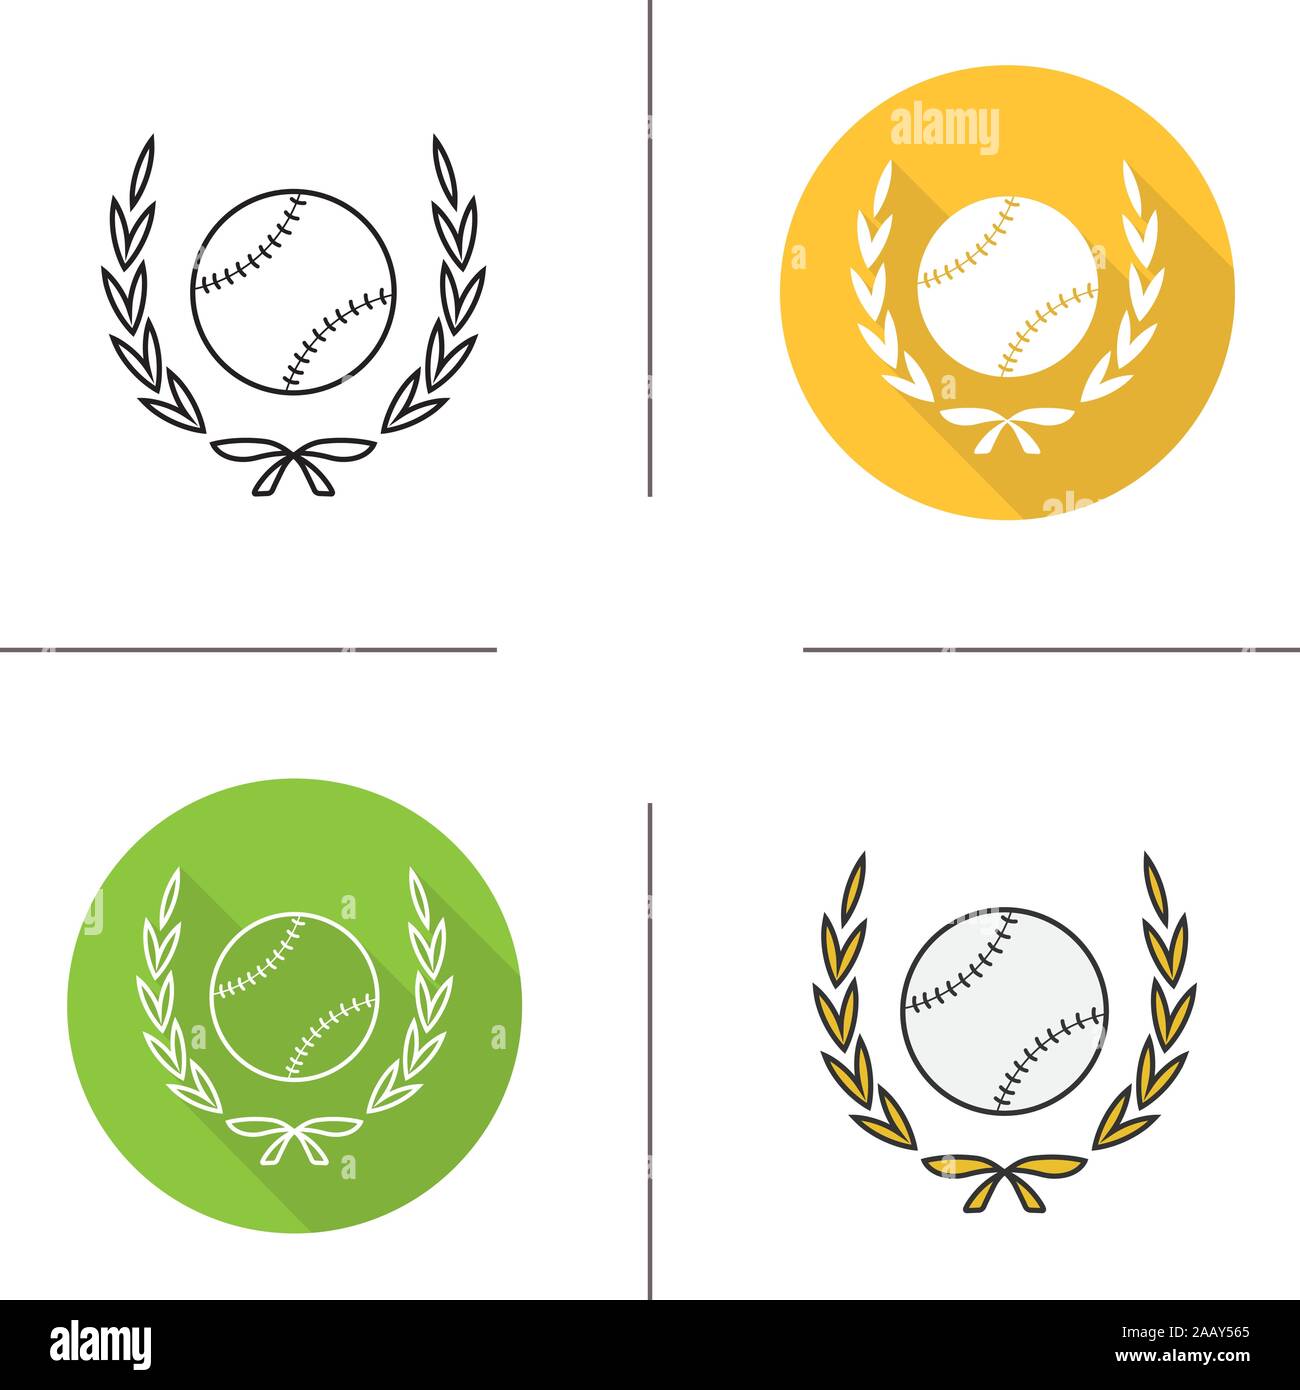 Baseball ball in laurel wreath icon. Flat design, linear and color styles. Softball championship trophy symbol. Isolated vector illustrations Stock Vector